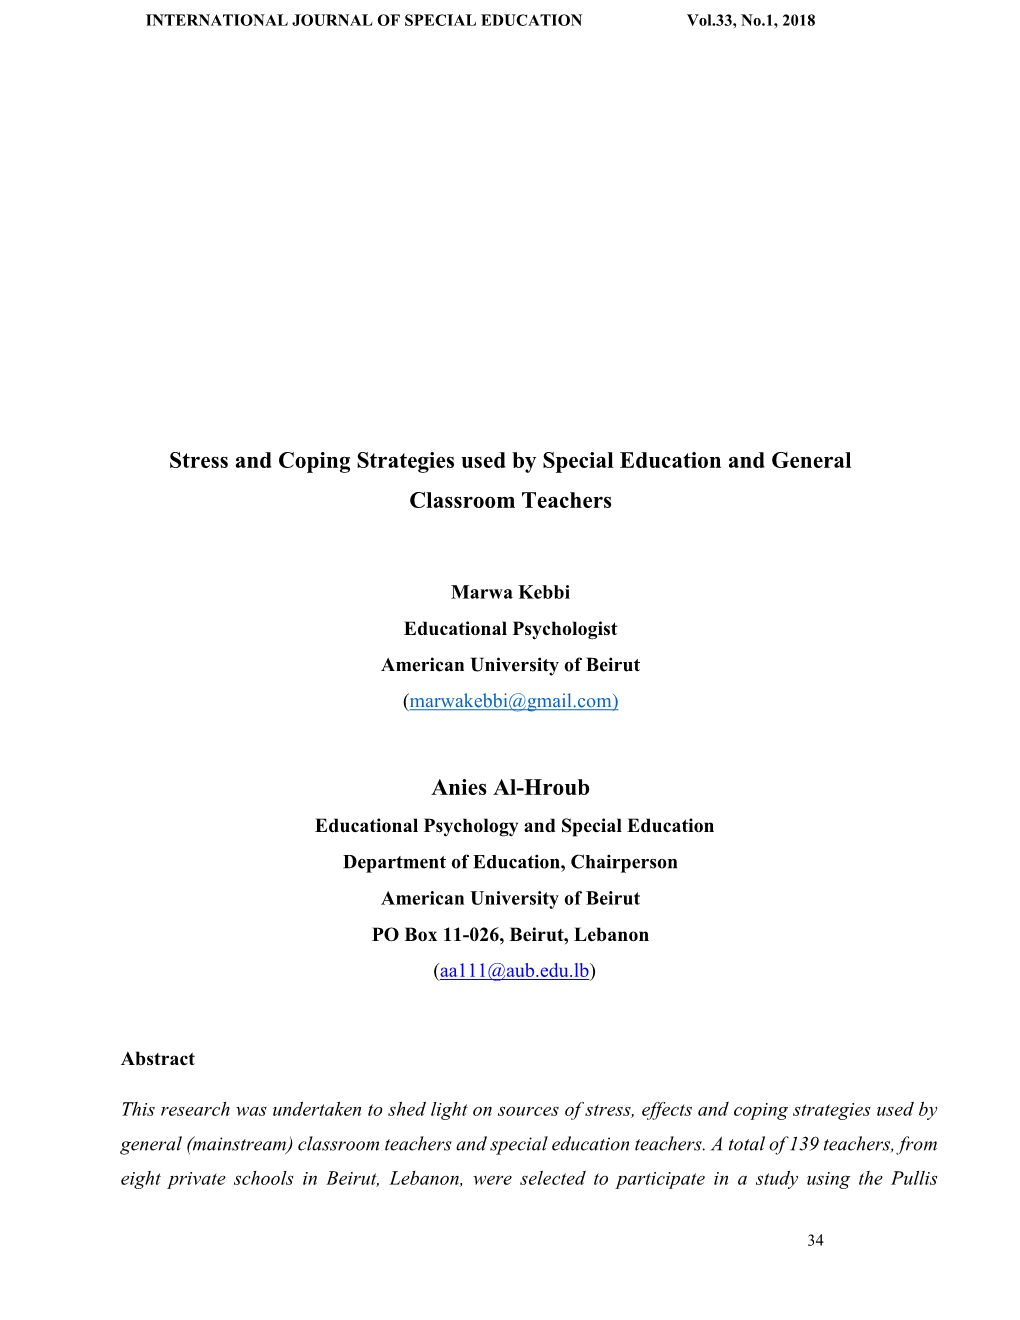 Stress and Coping Strategies Used by Special Education and General Classroom Teachers